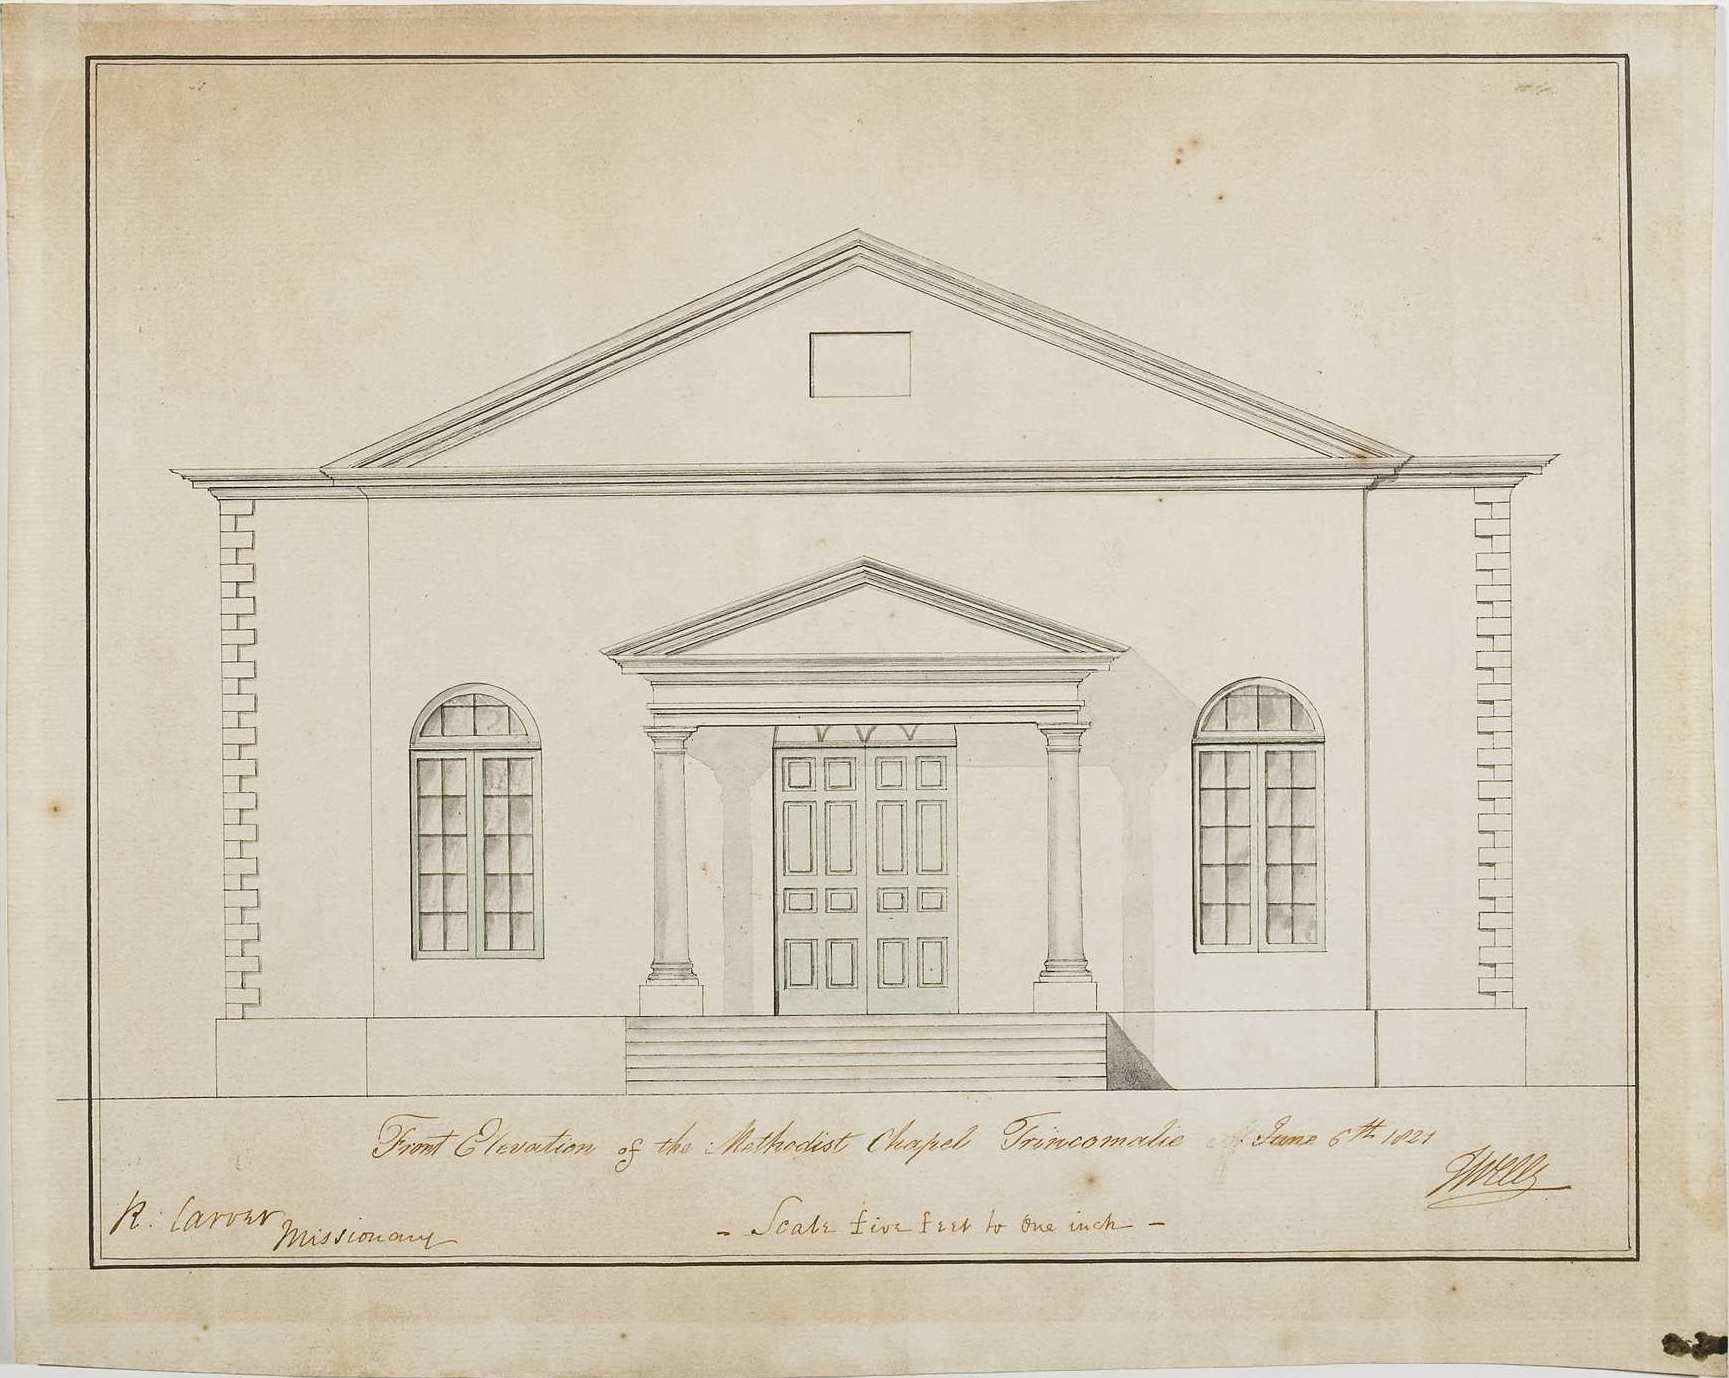 Front elevation of the Methodist Chapel Trincomalie June 6th 1821 / T. Wells